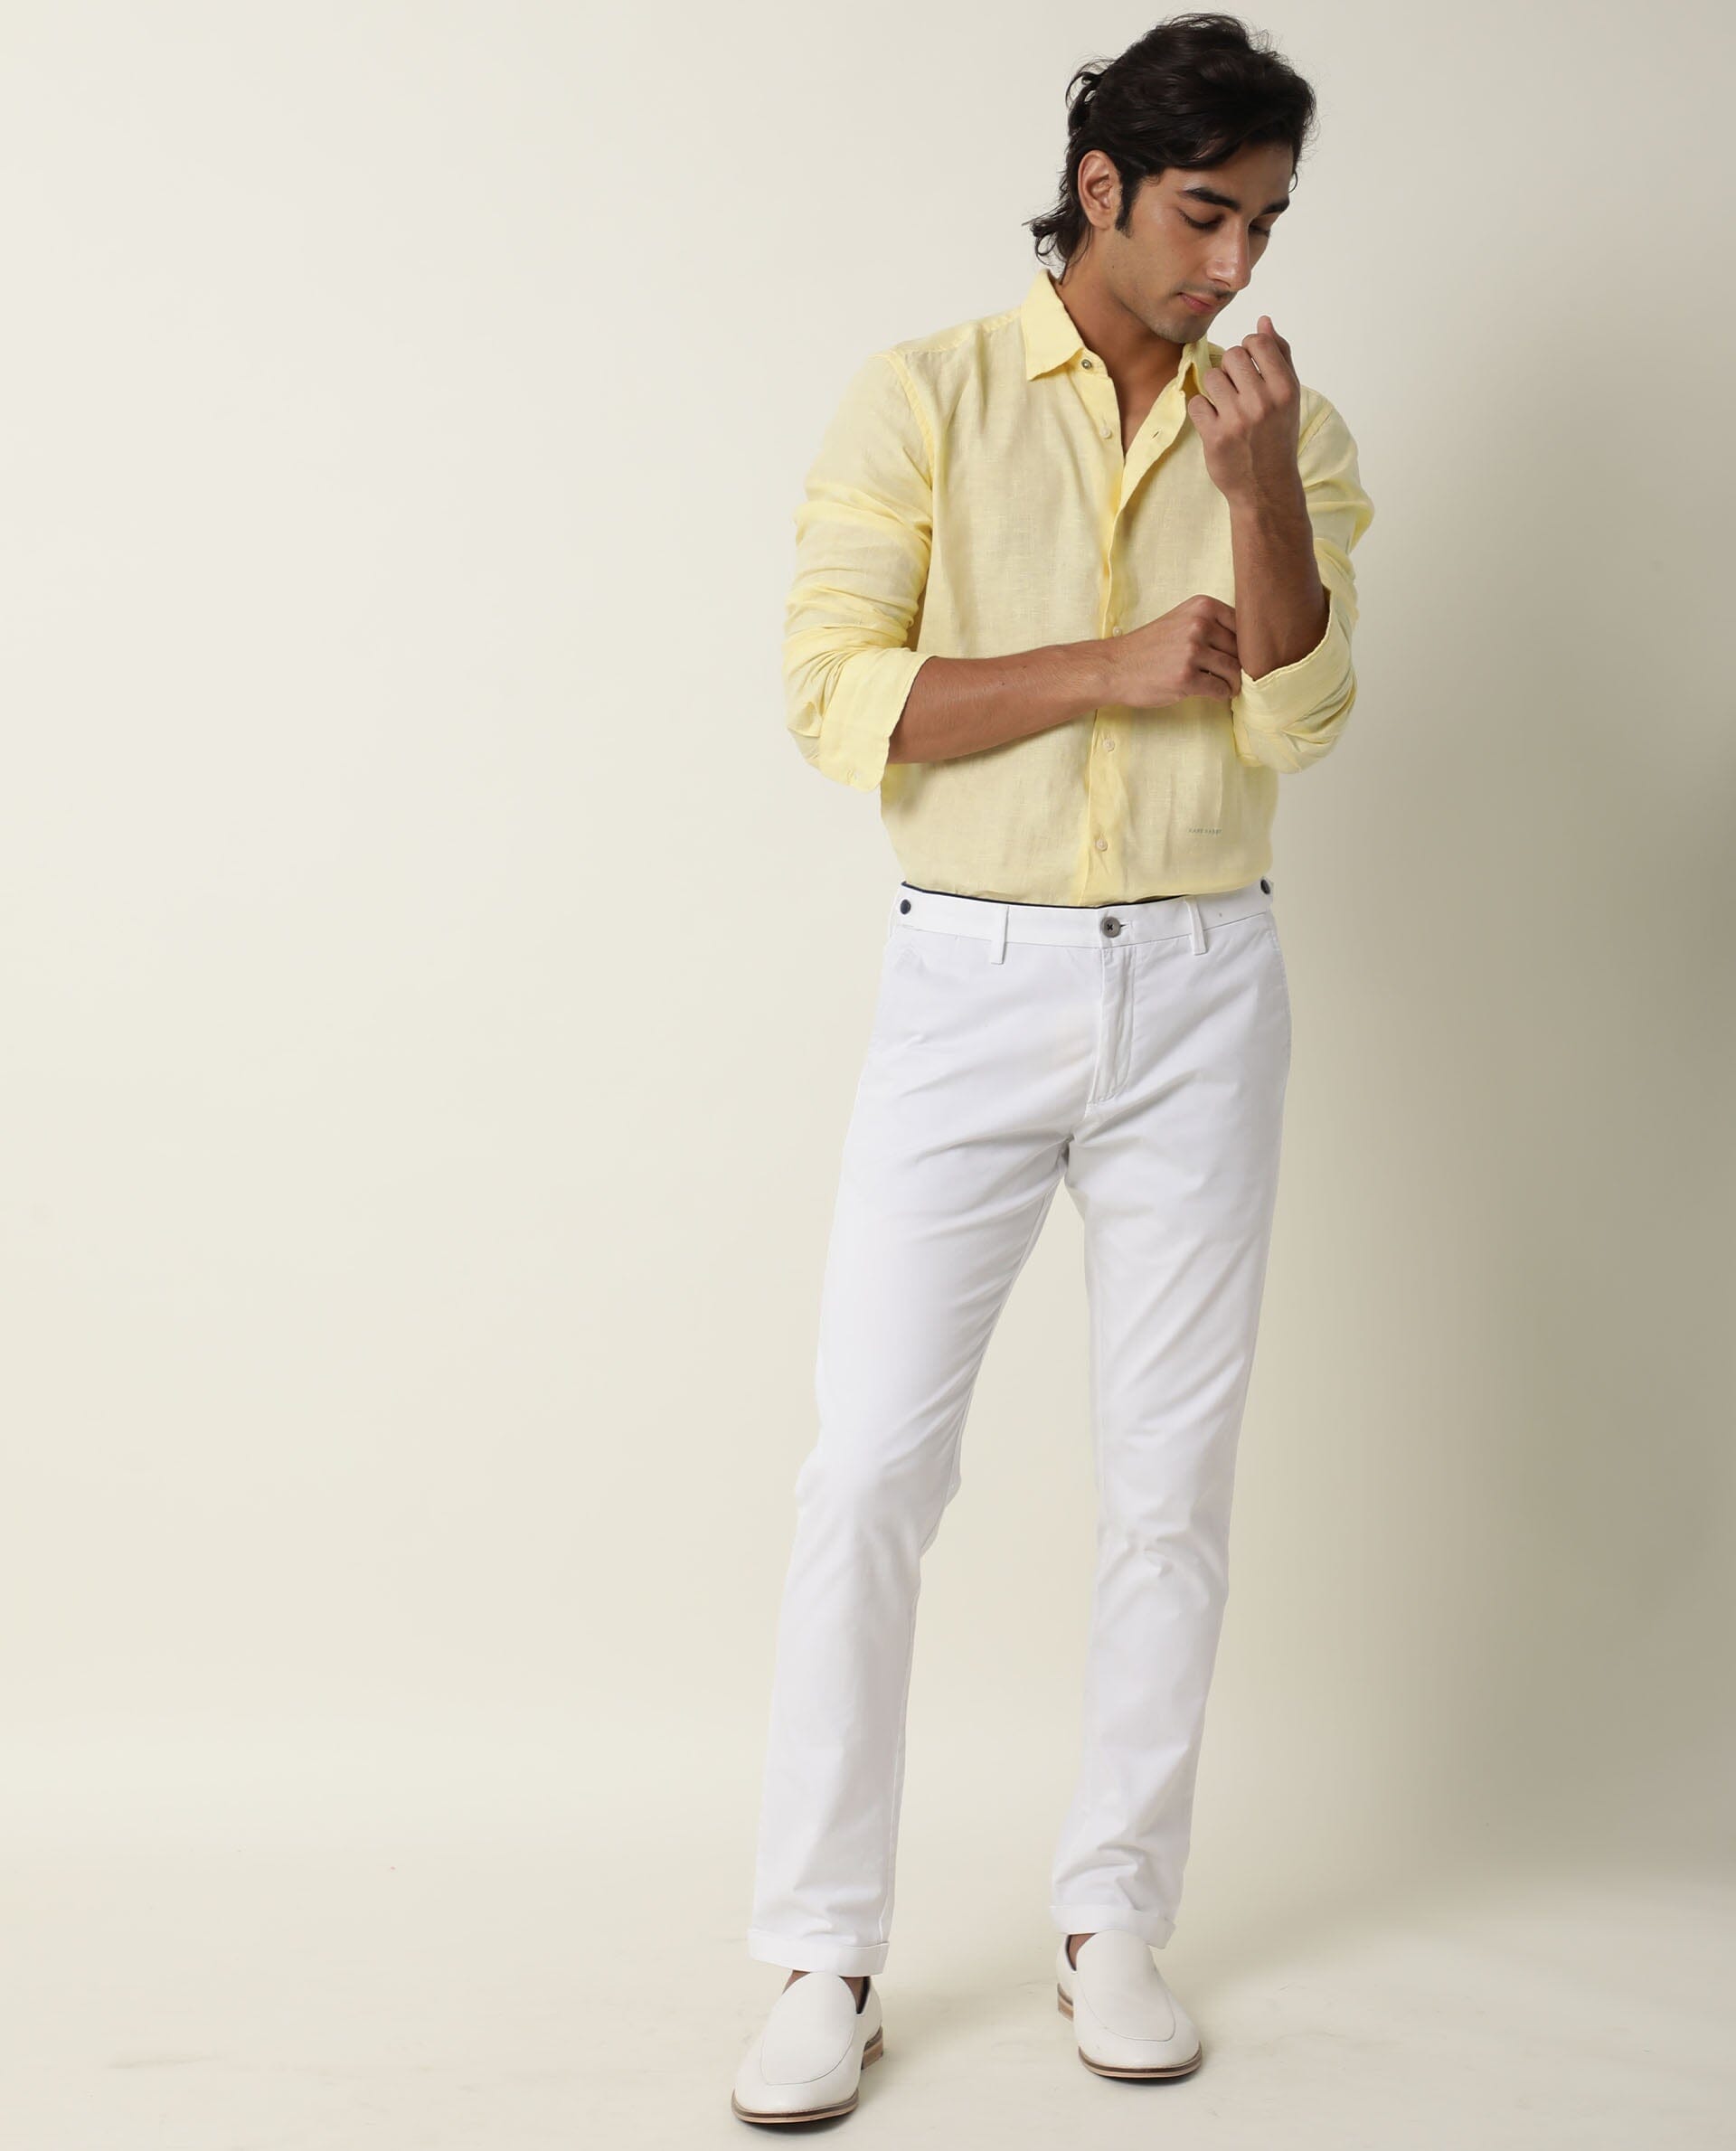 Yellow Polo with White Pants Outfits For Men In Their 20s (3 ideas &  outfits) | Lookastic